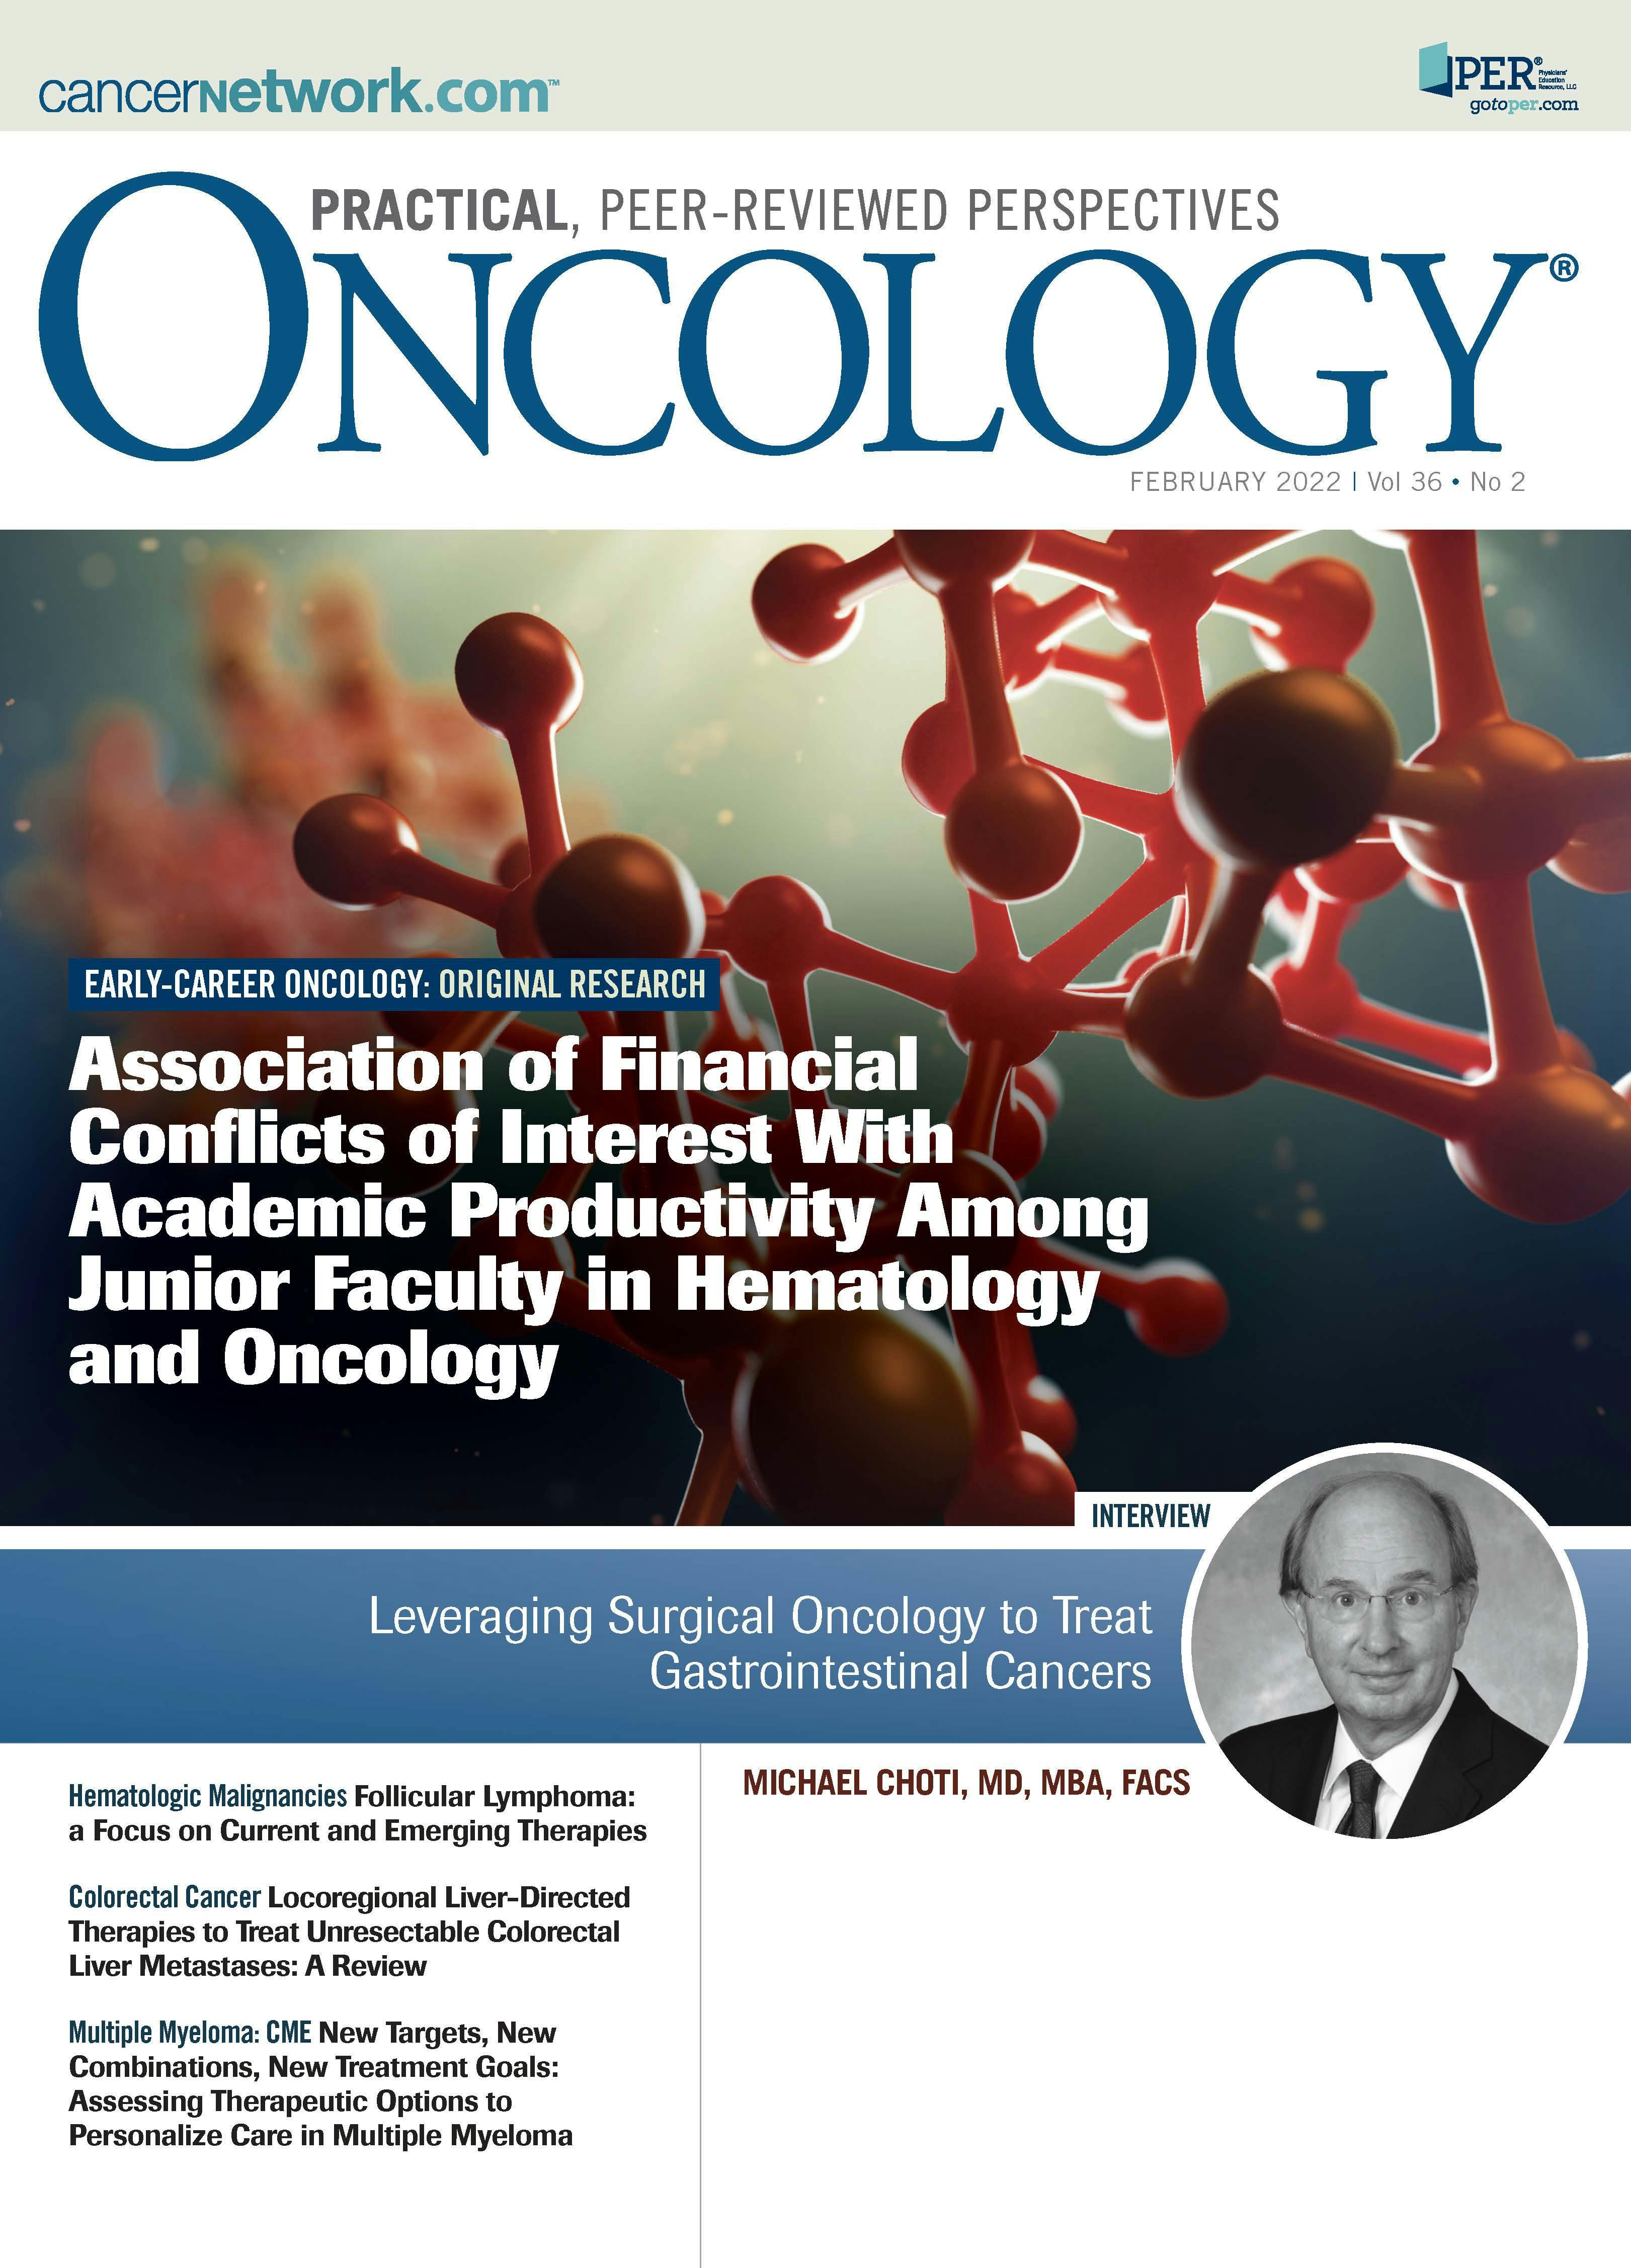 ONCOLOGY Vol 36, Issue 2